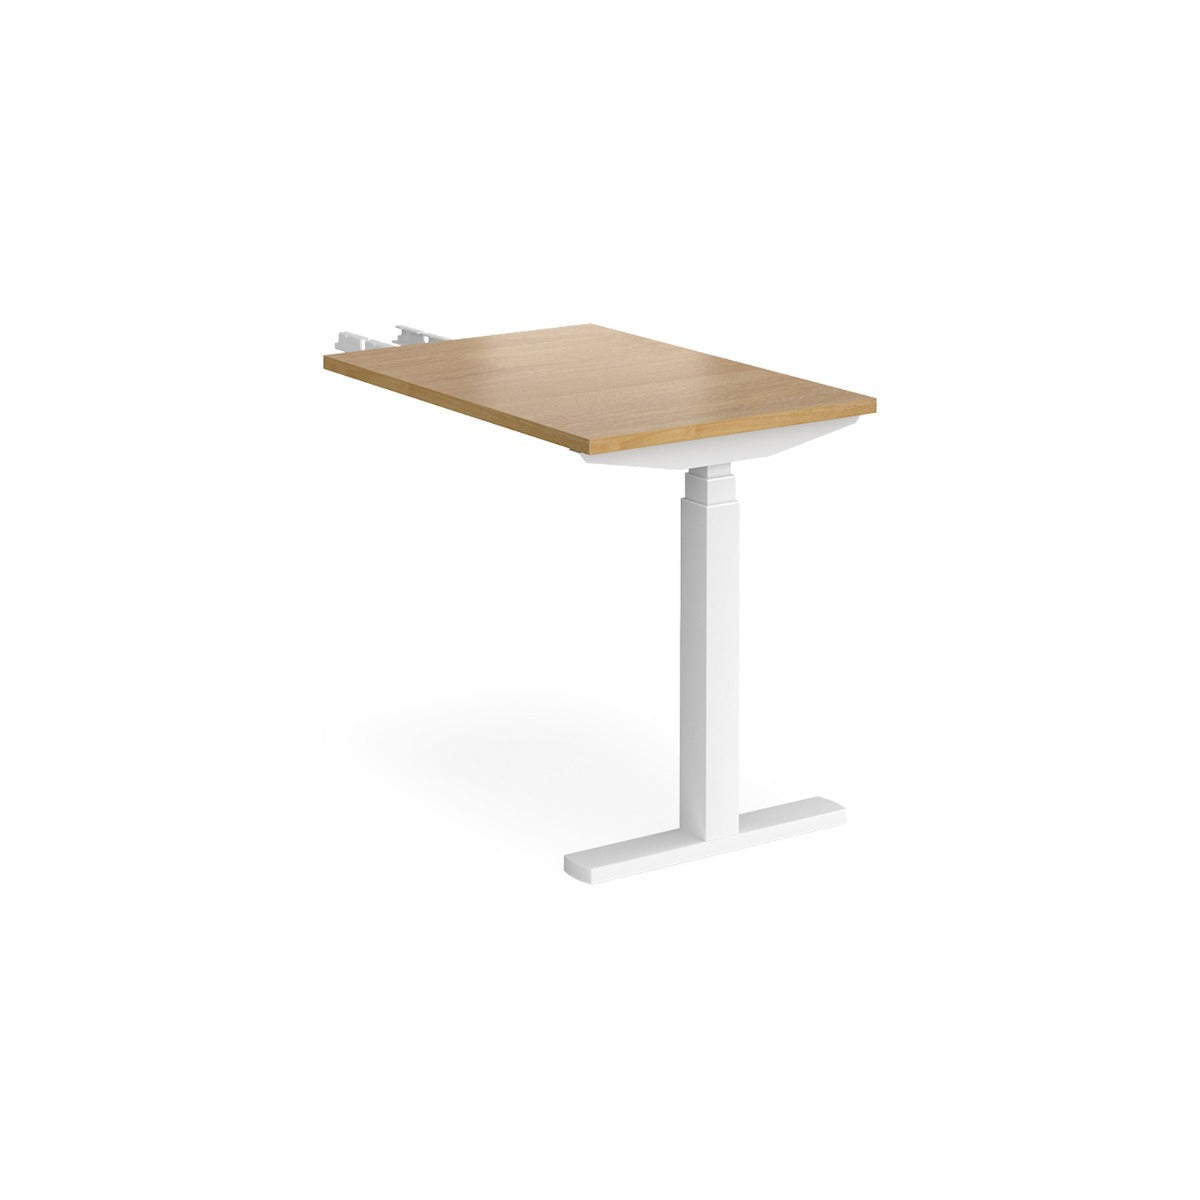 Elev8 Touch Electric Sit/Stand Additional Desk Top